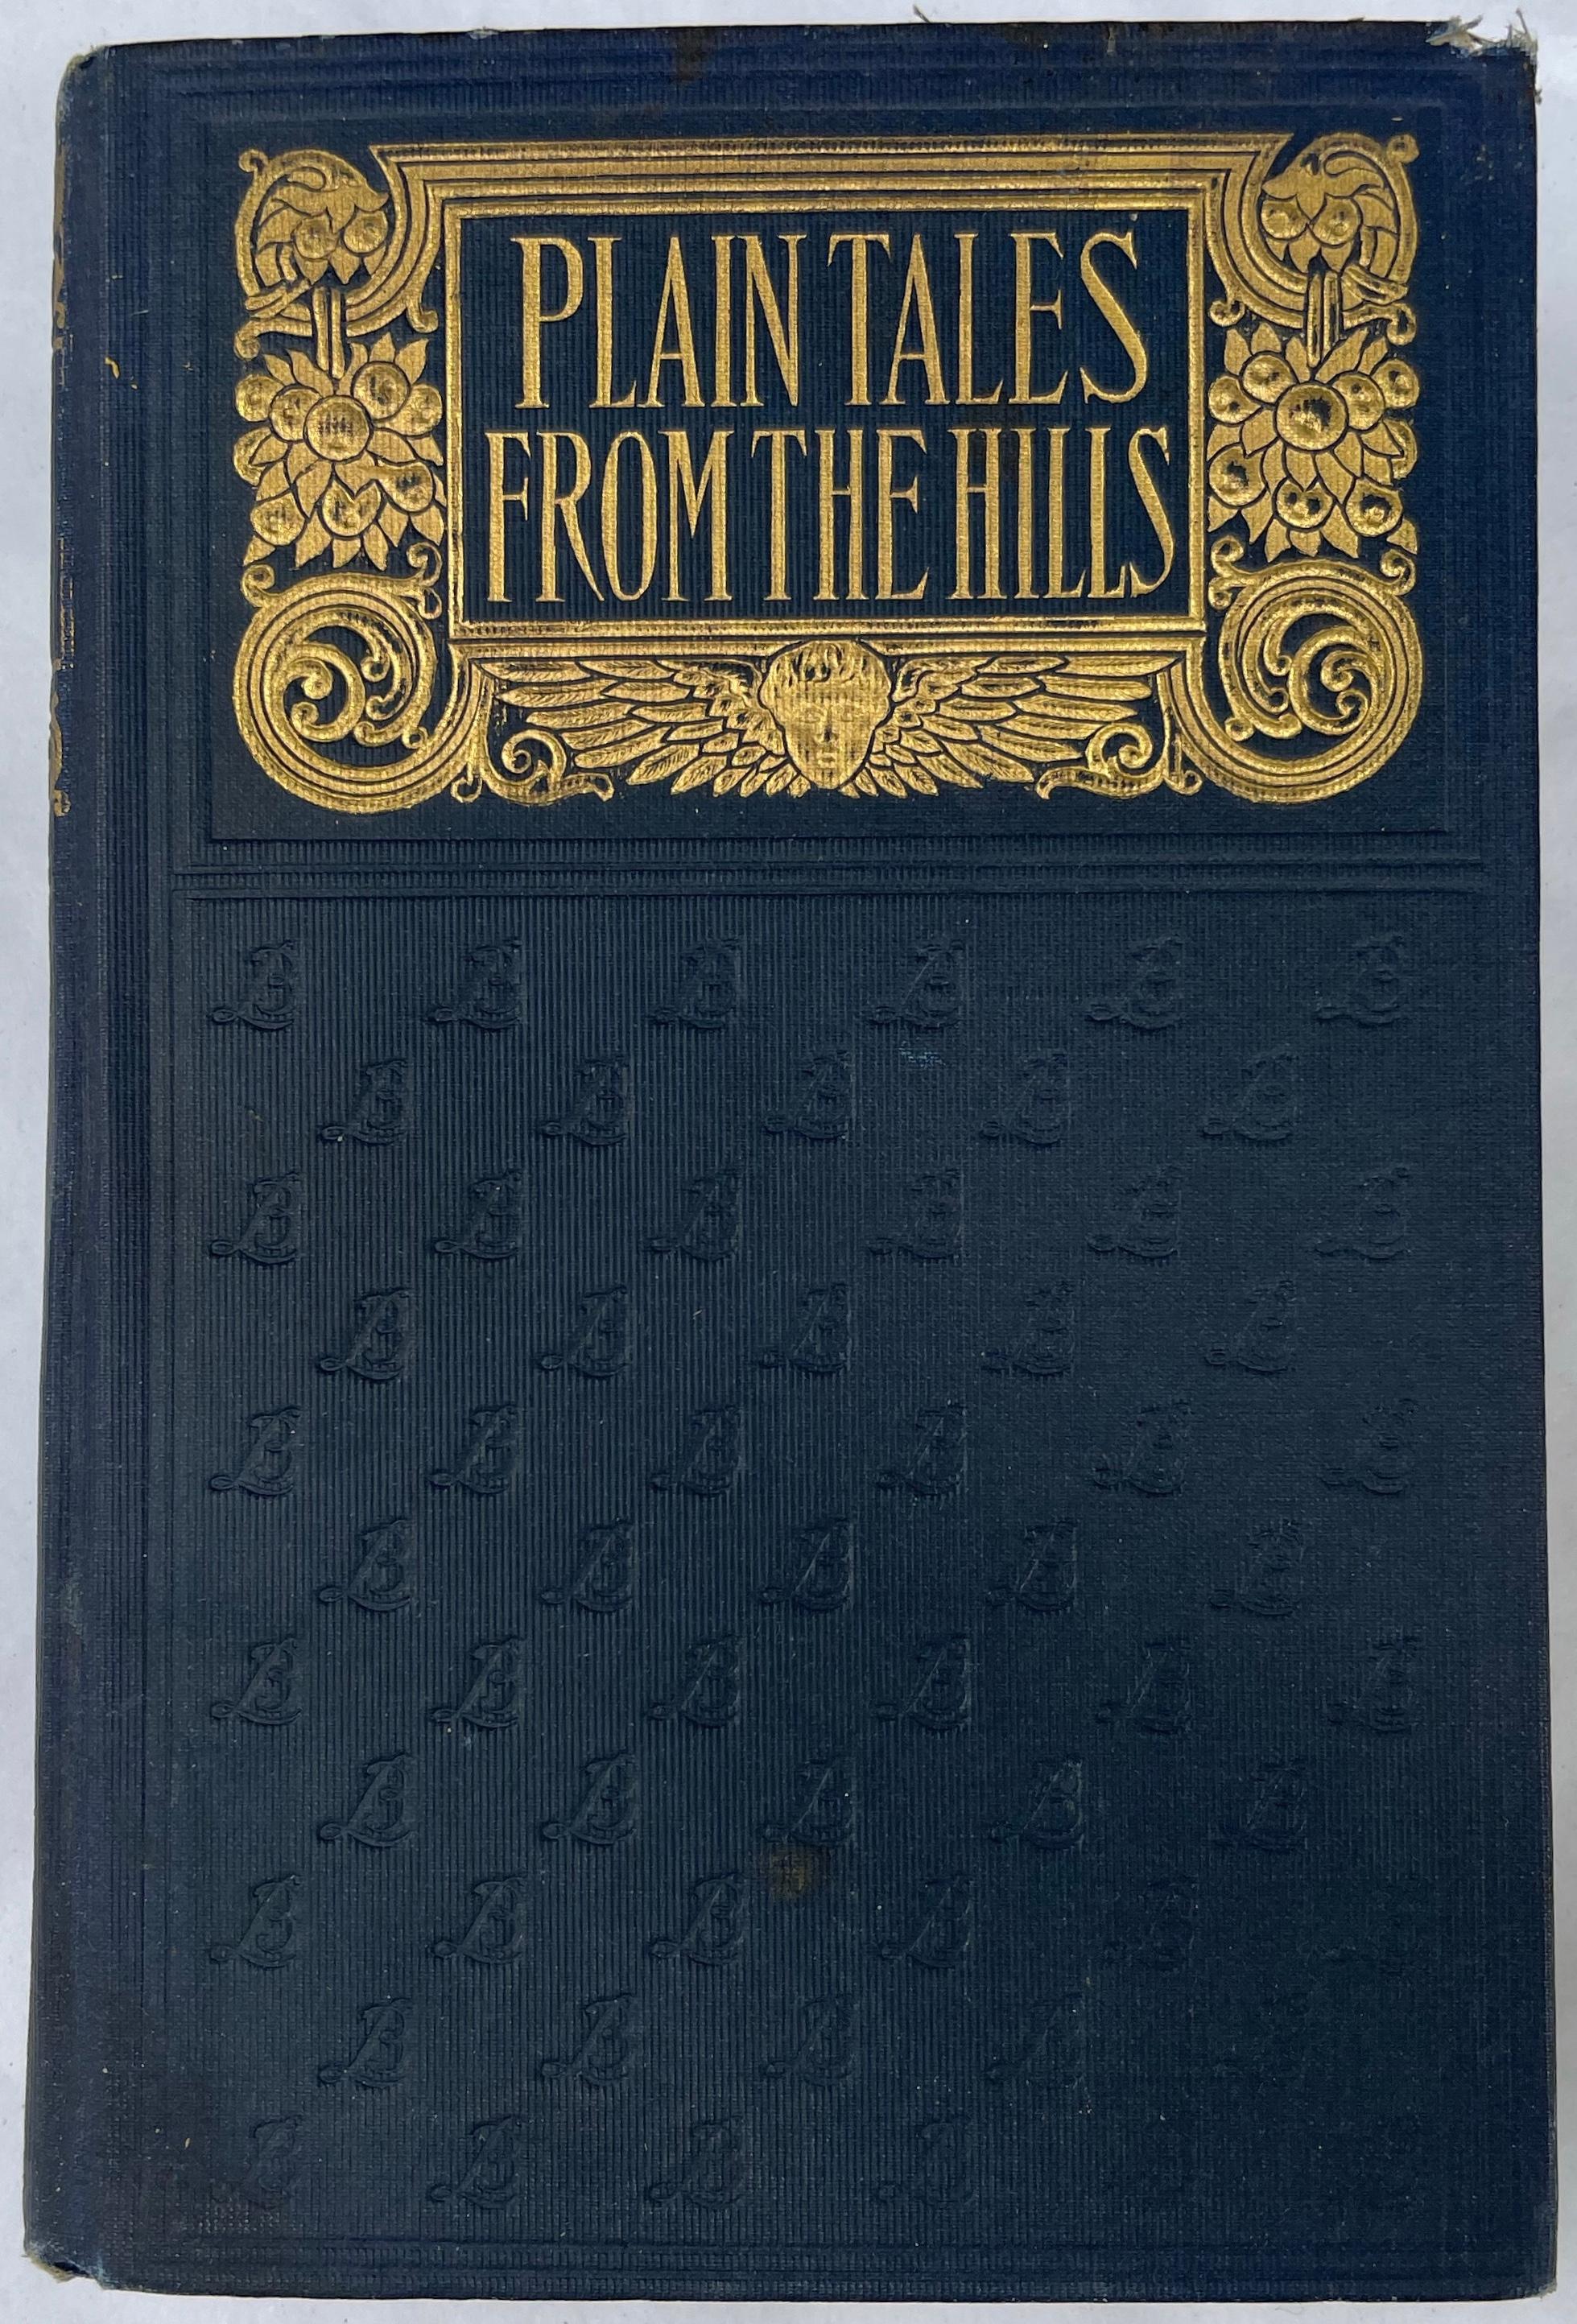 Plain Tales from the Hills by Rudyard Kipling. Brilliant blue linen cloth cover with gold embossed cover. Beautiful aesthetic edition to a fine and decorative library, retailed by the Frederick Loeser & Co.department store of New York. Light wear to